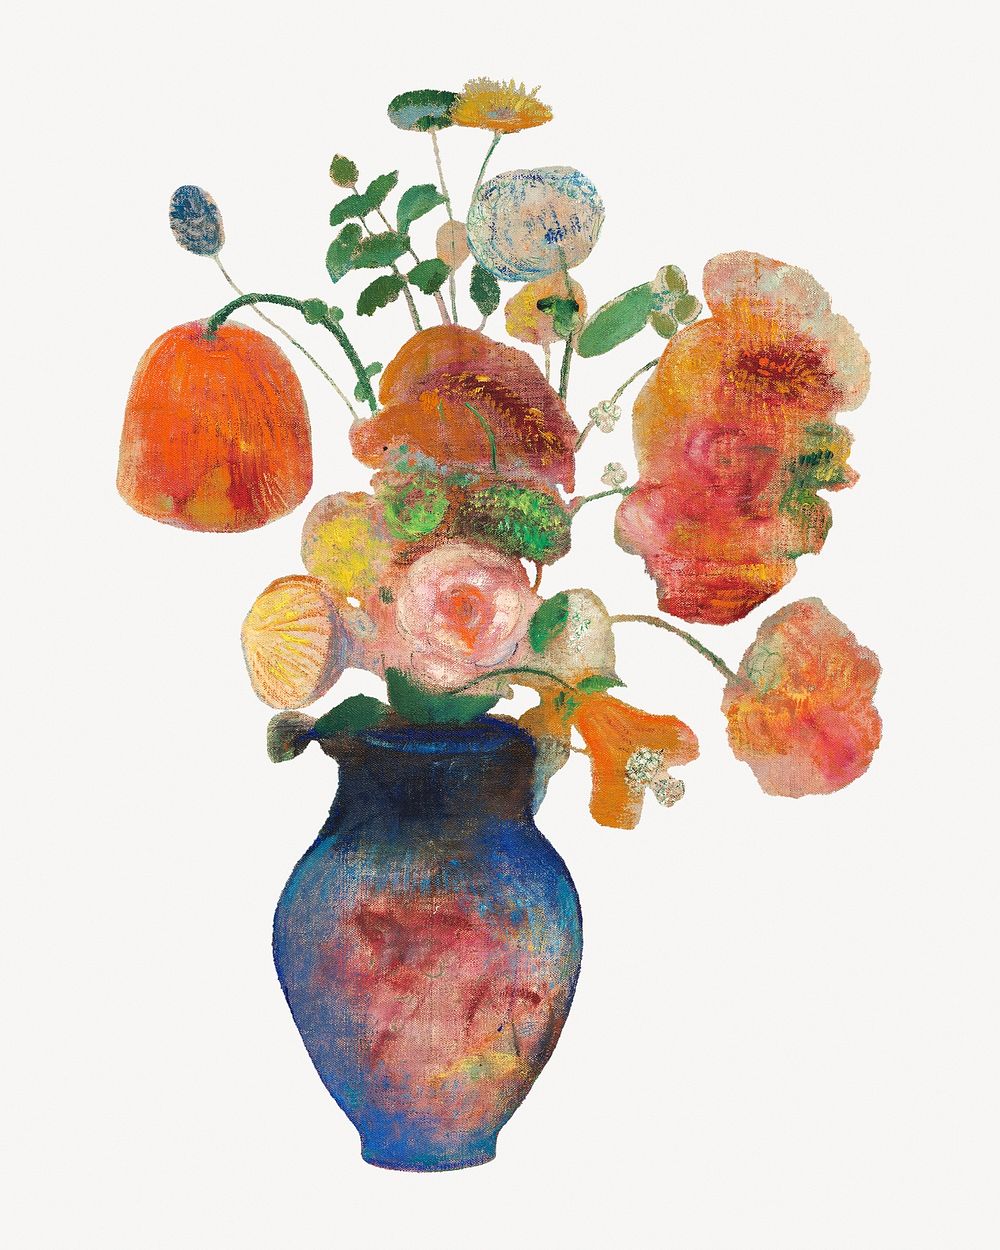 Odilon Redon's Large Vase with Flowers, famous oil painting, remixed by rawpixel